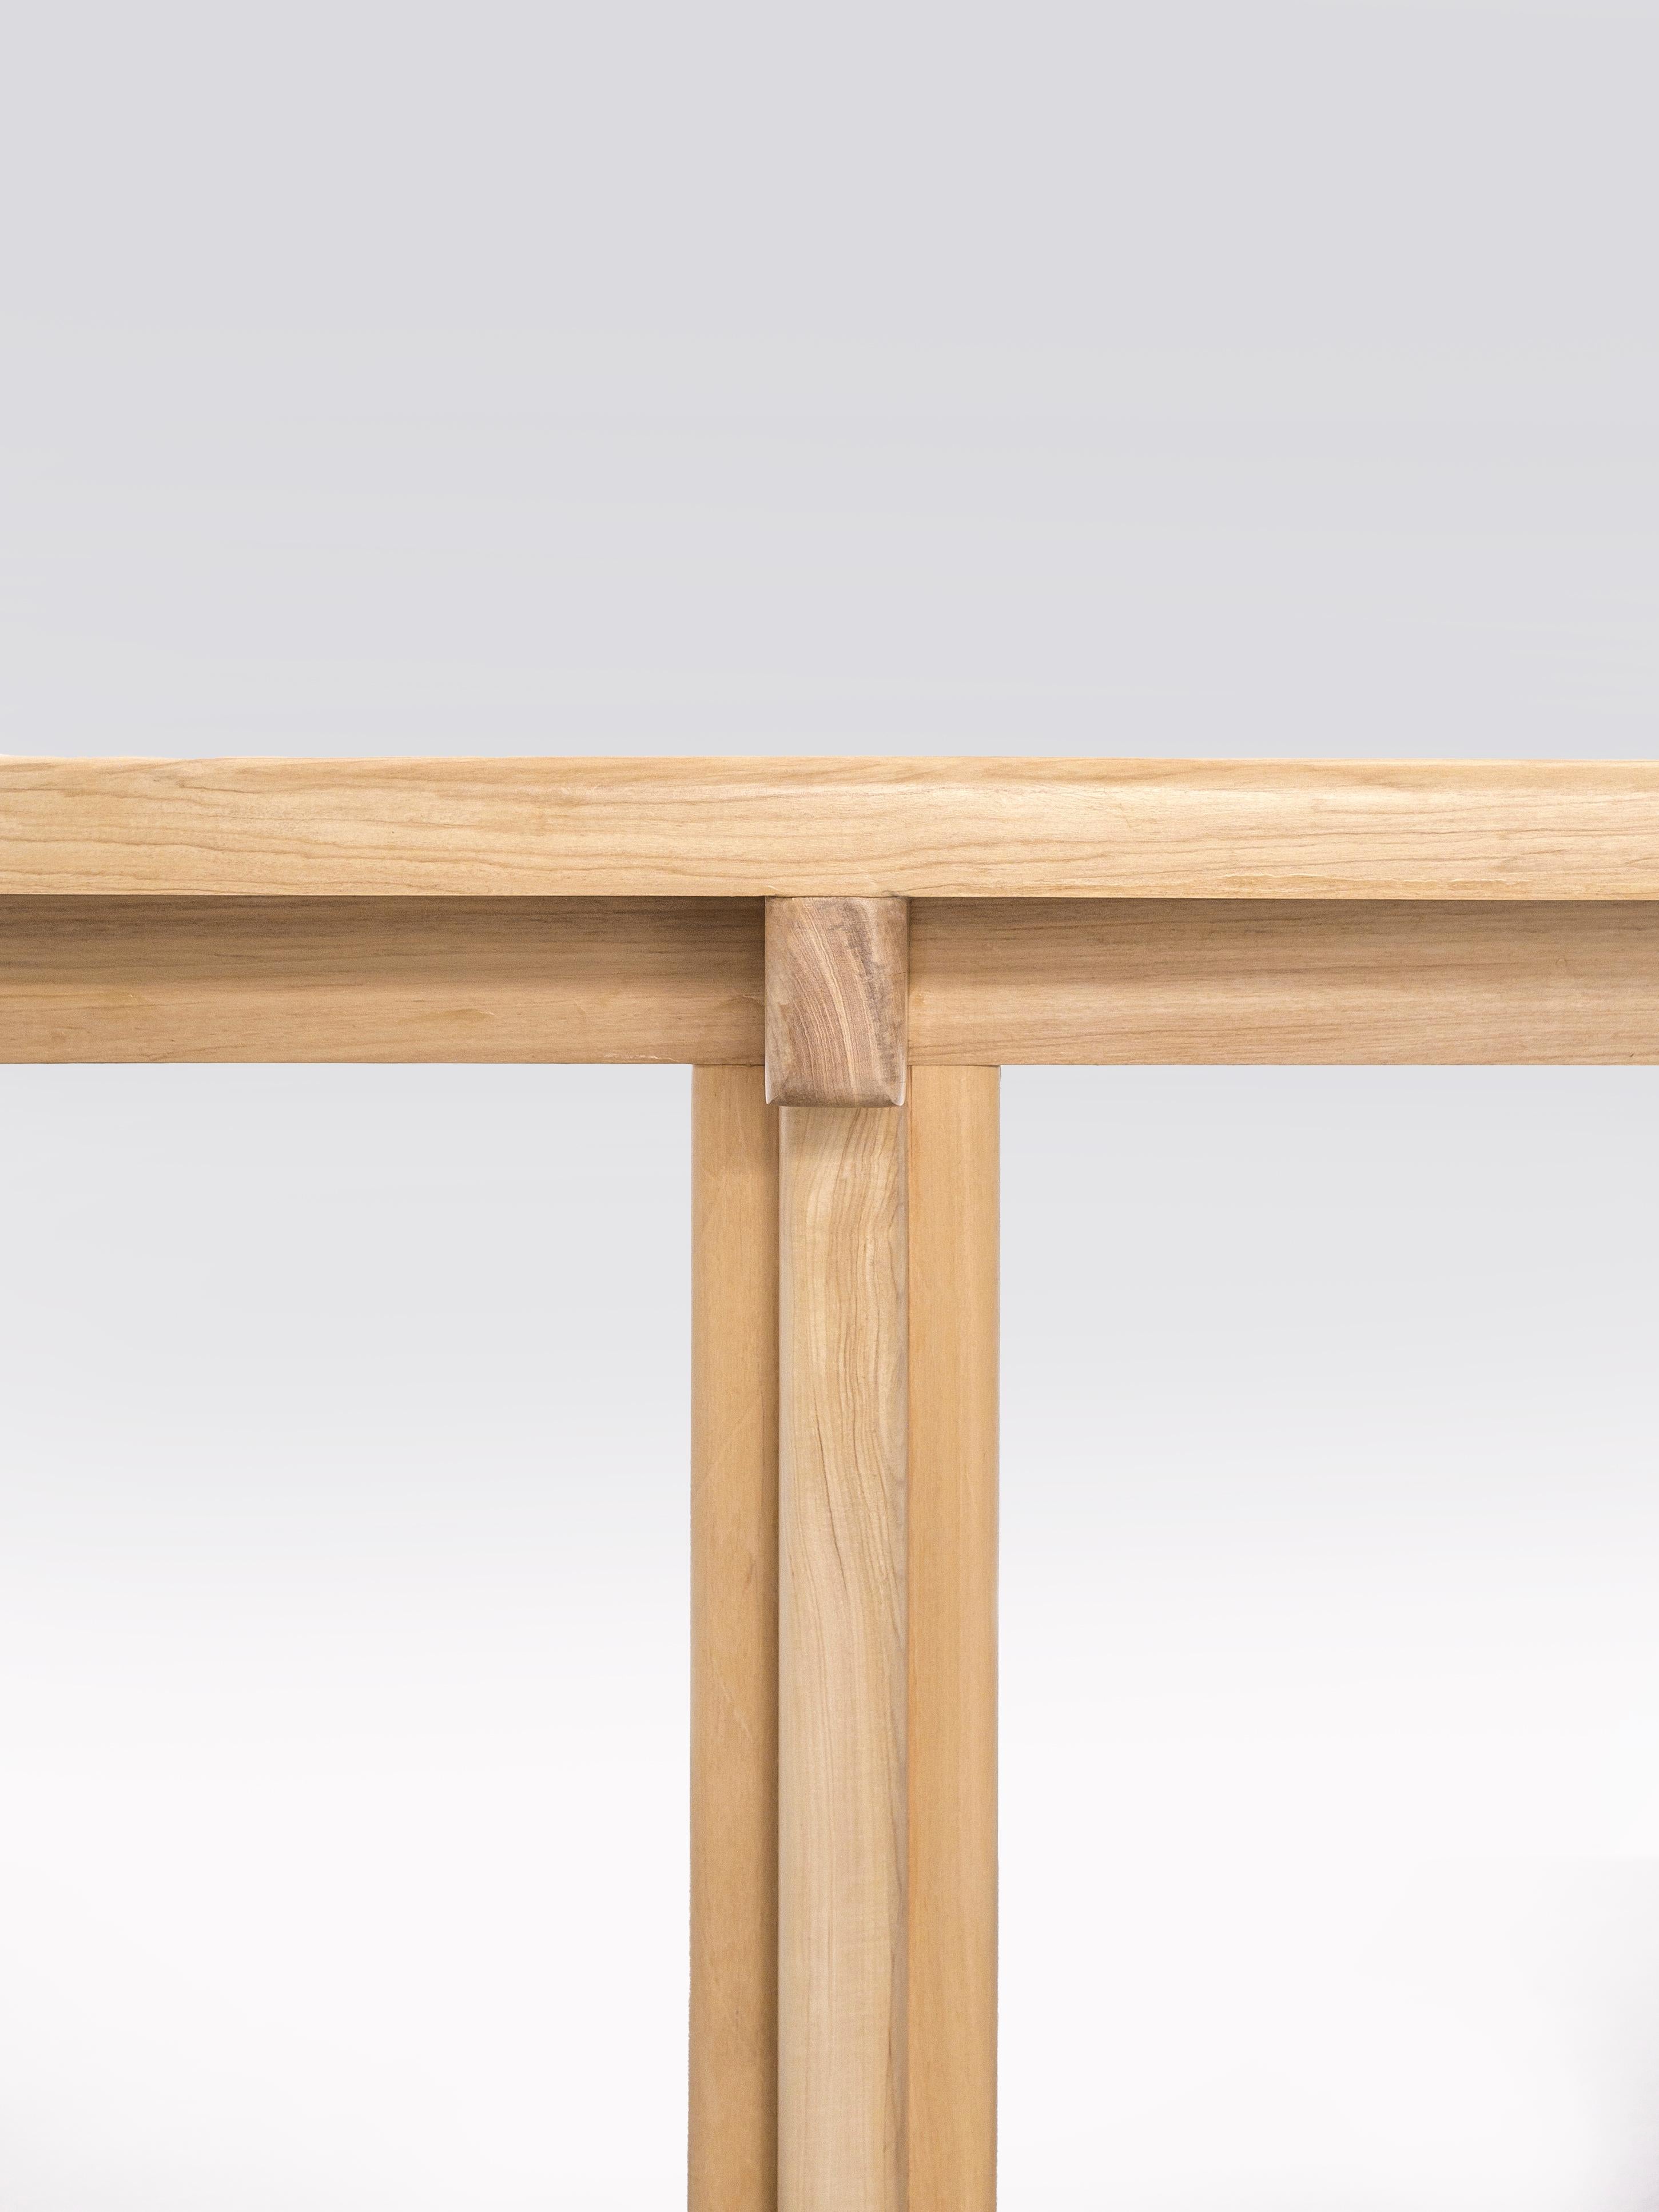 Argentine ORNO Contemporary Dining Table in Solid Hardwood by Ries For Sale